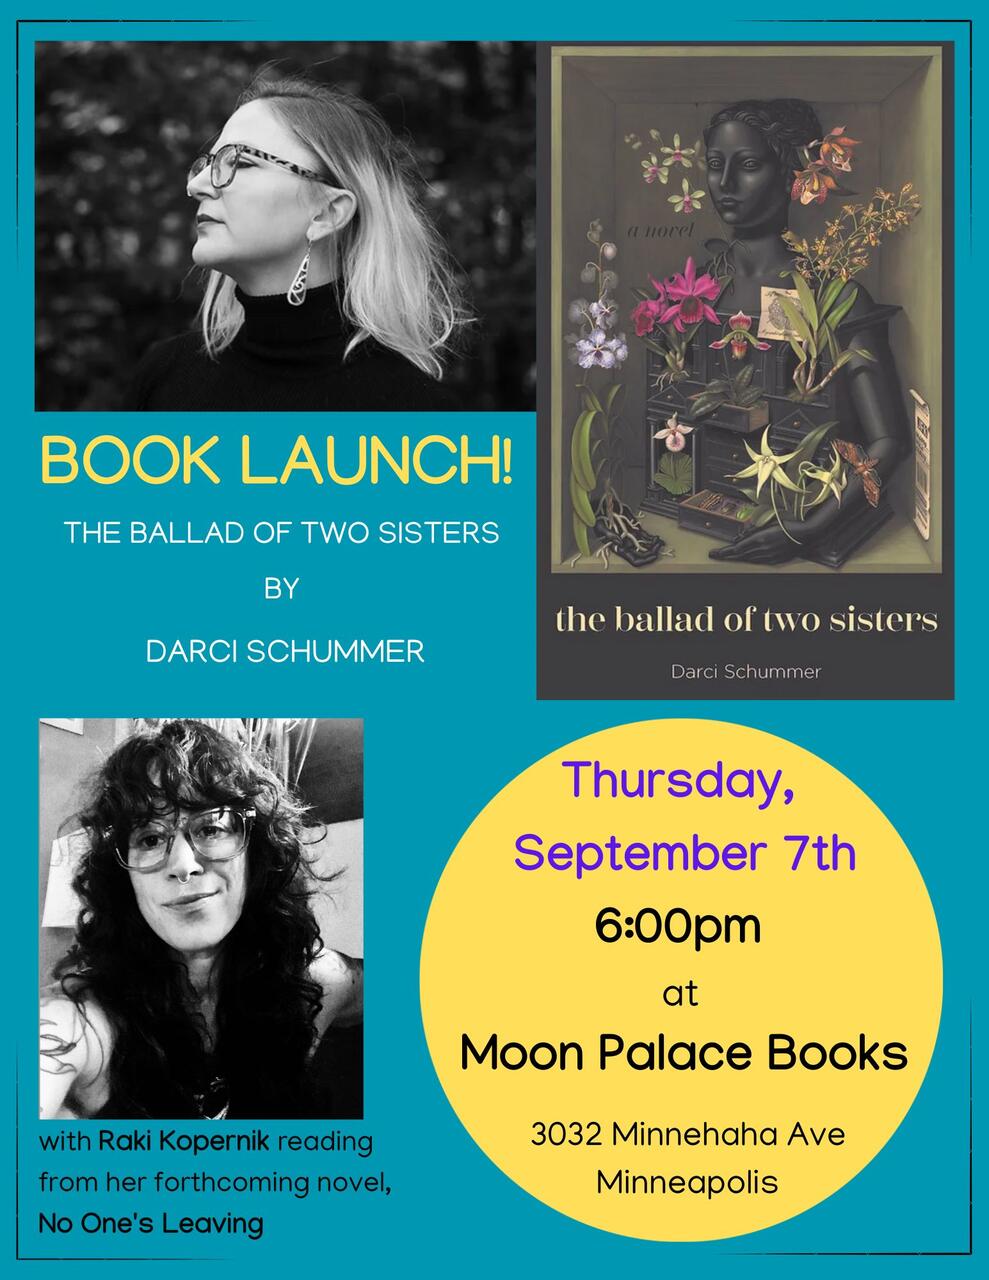 A promotional flyer promoting a book launch in Minneapolis.